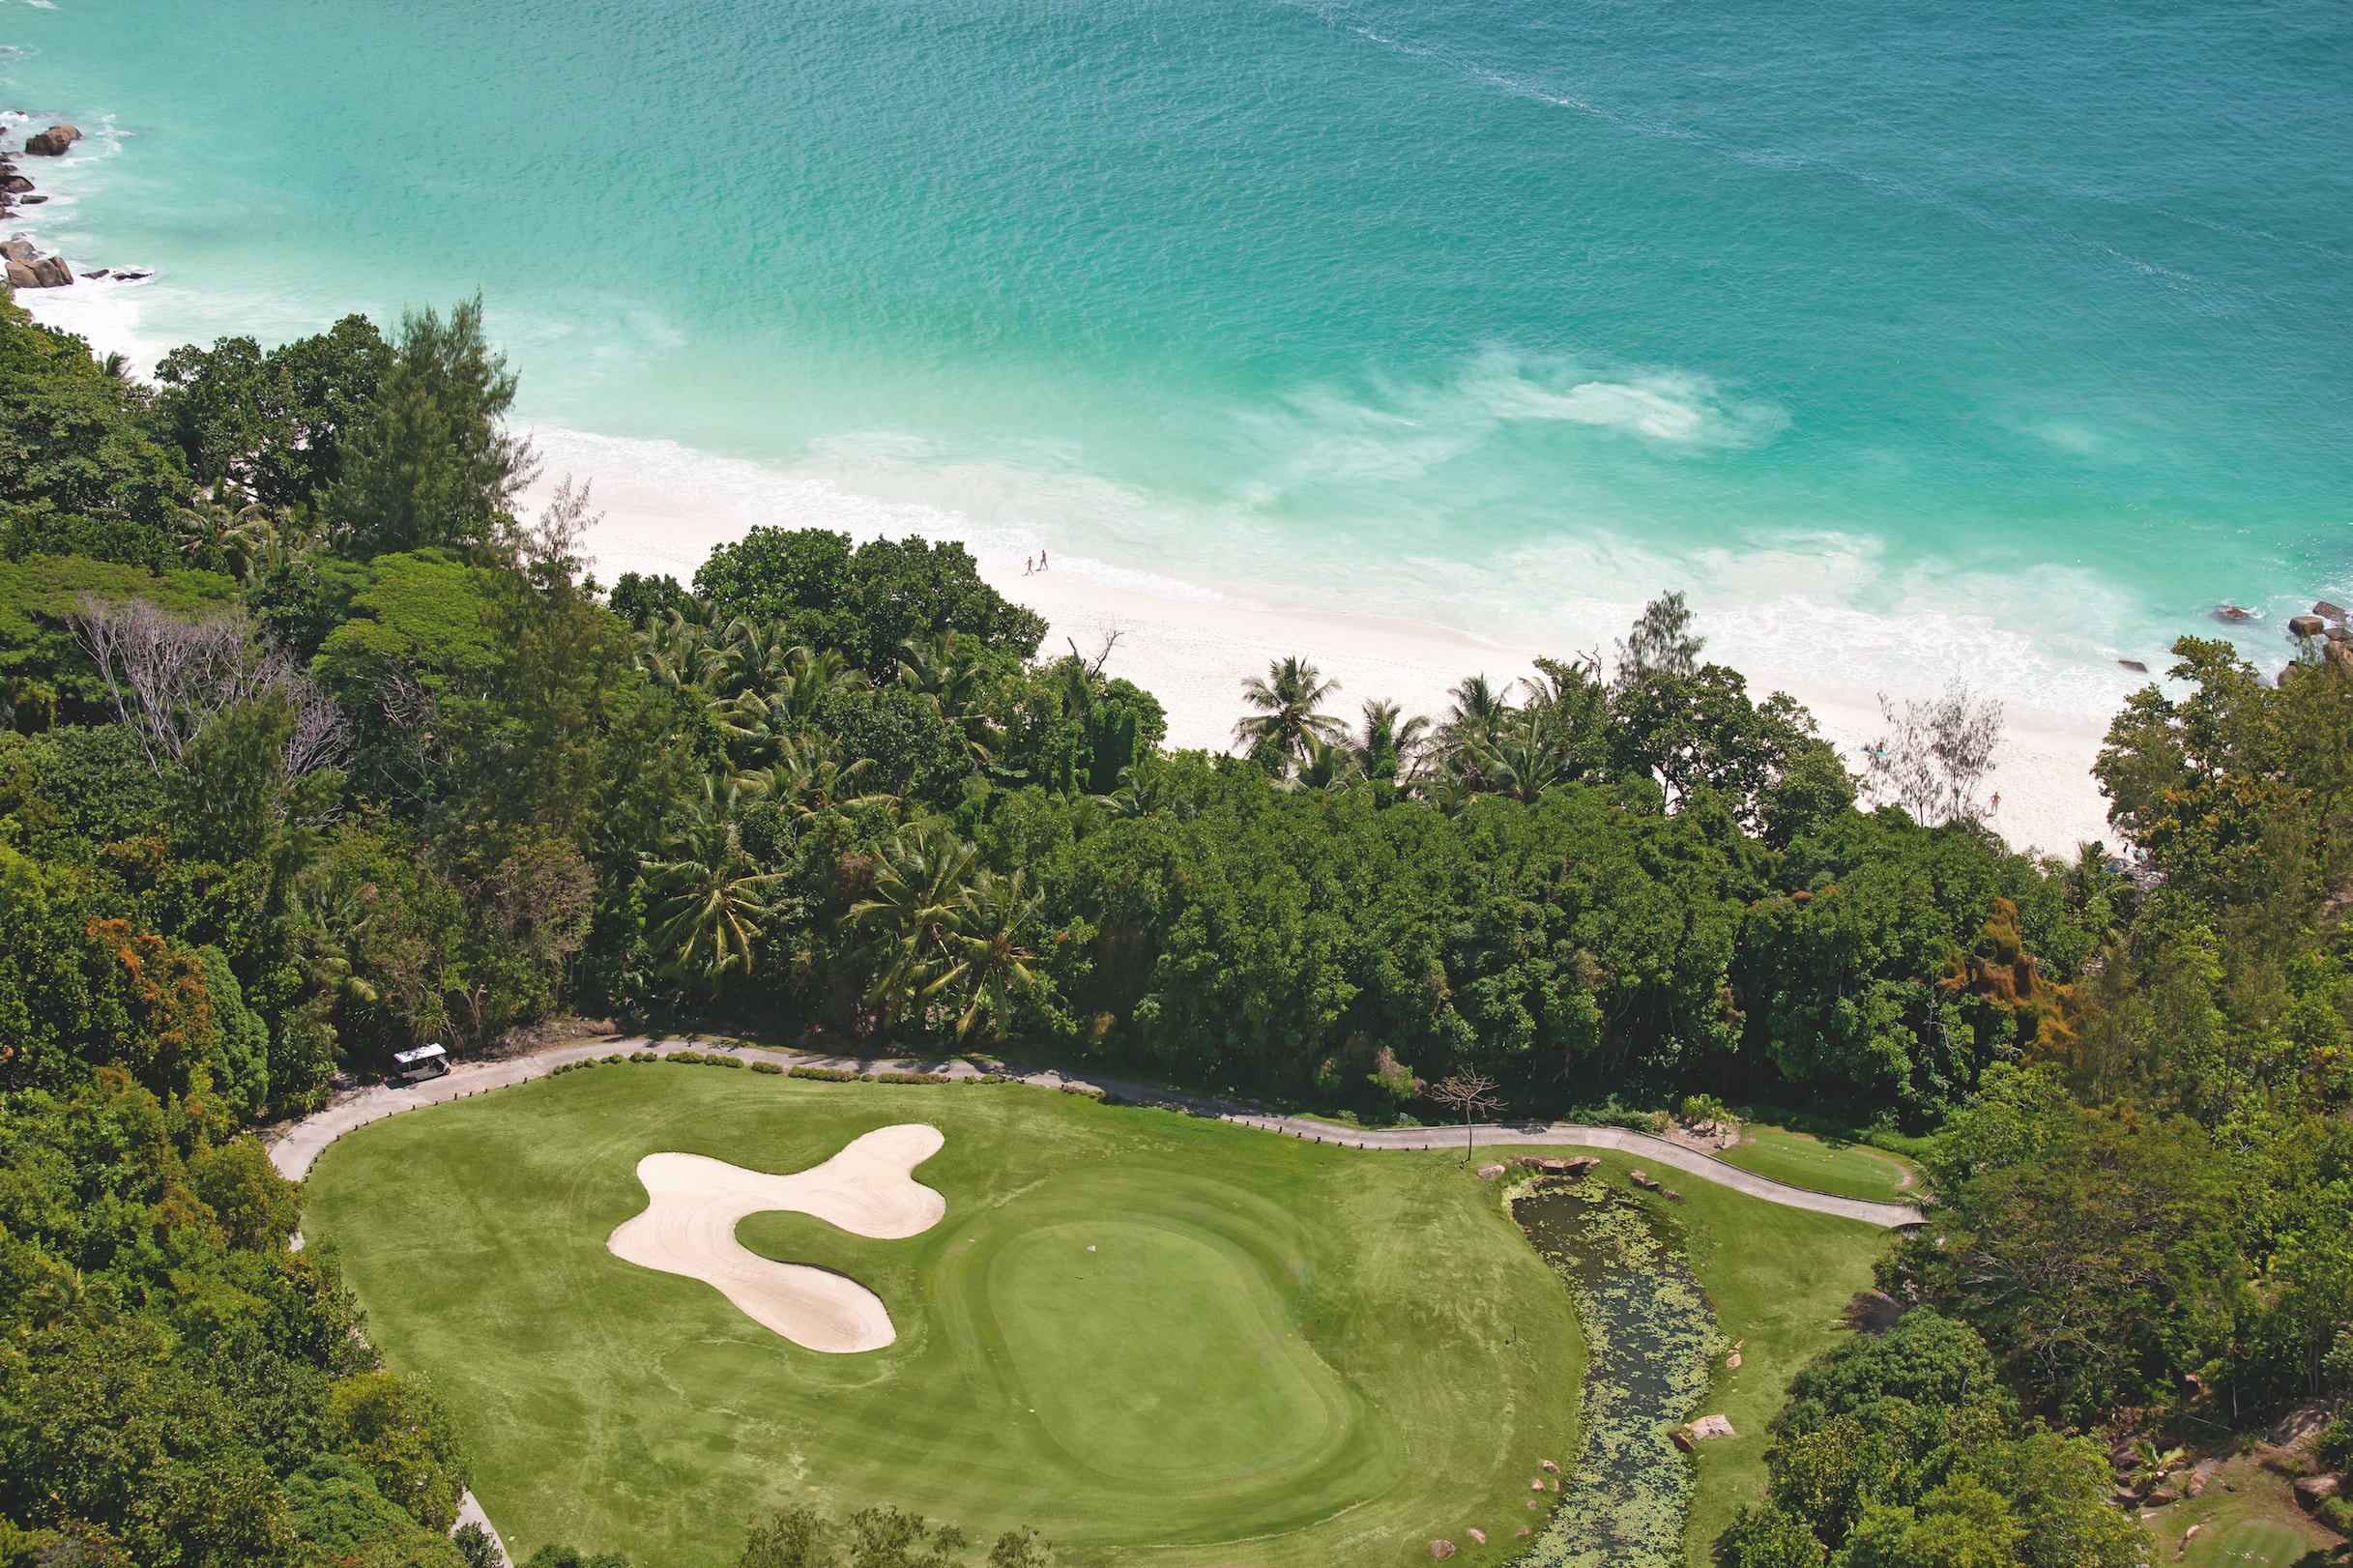 20 unmissable attractions in Seychelles - championship golf course